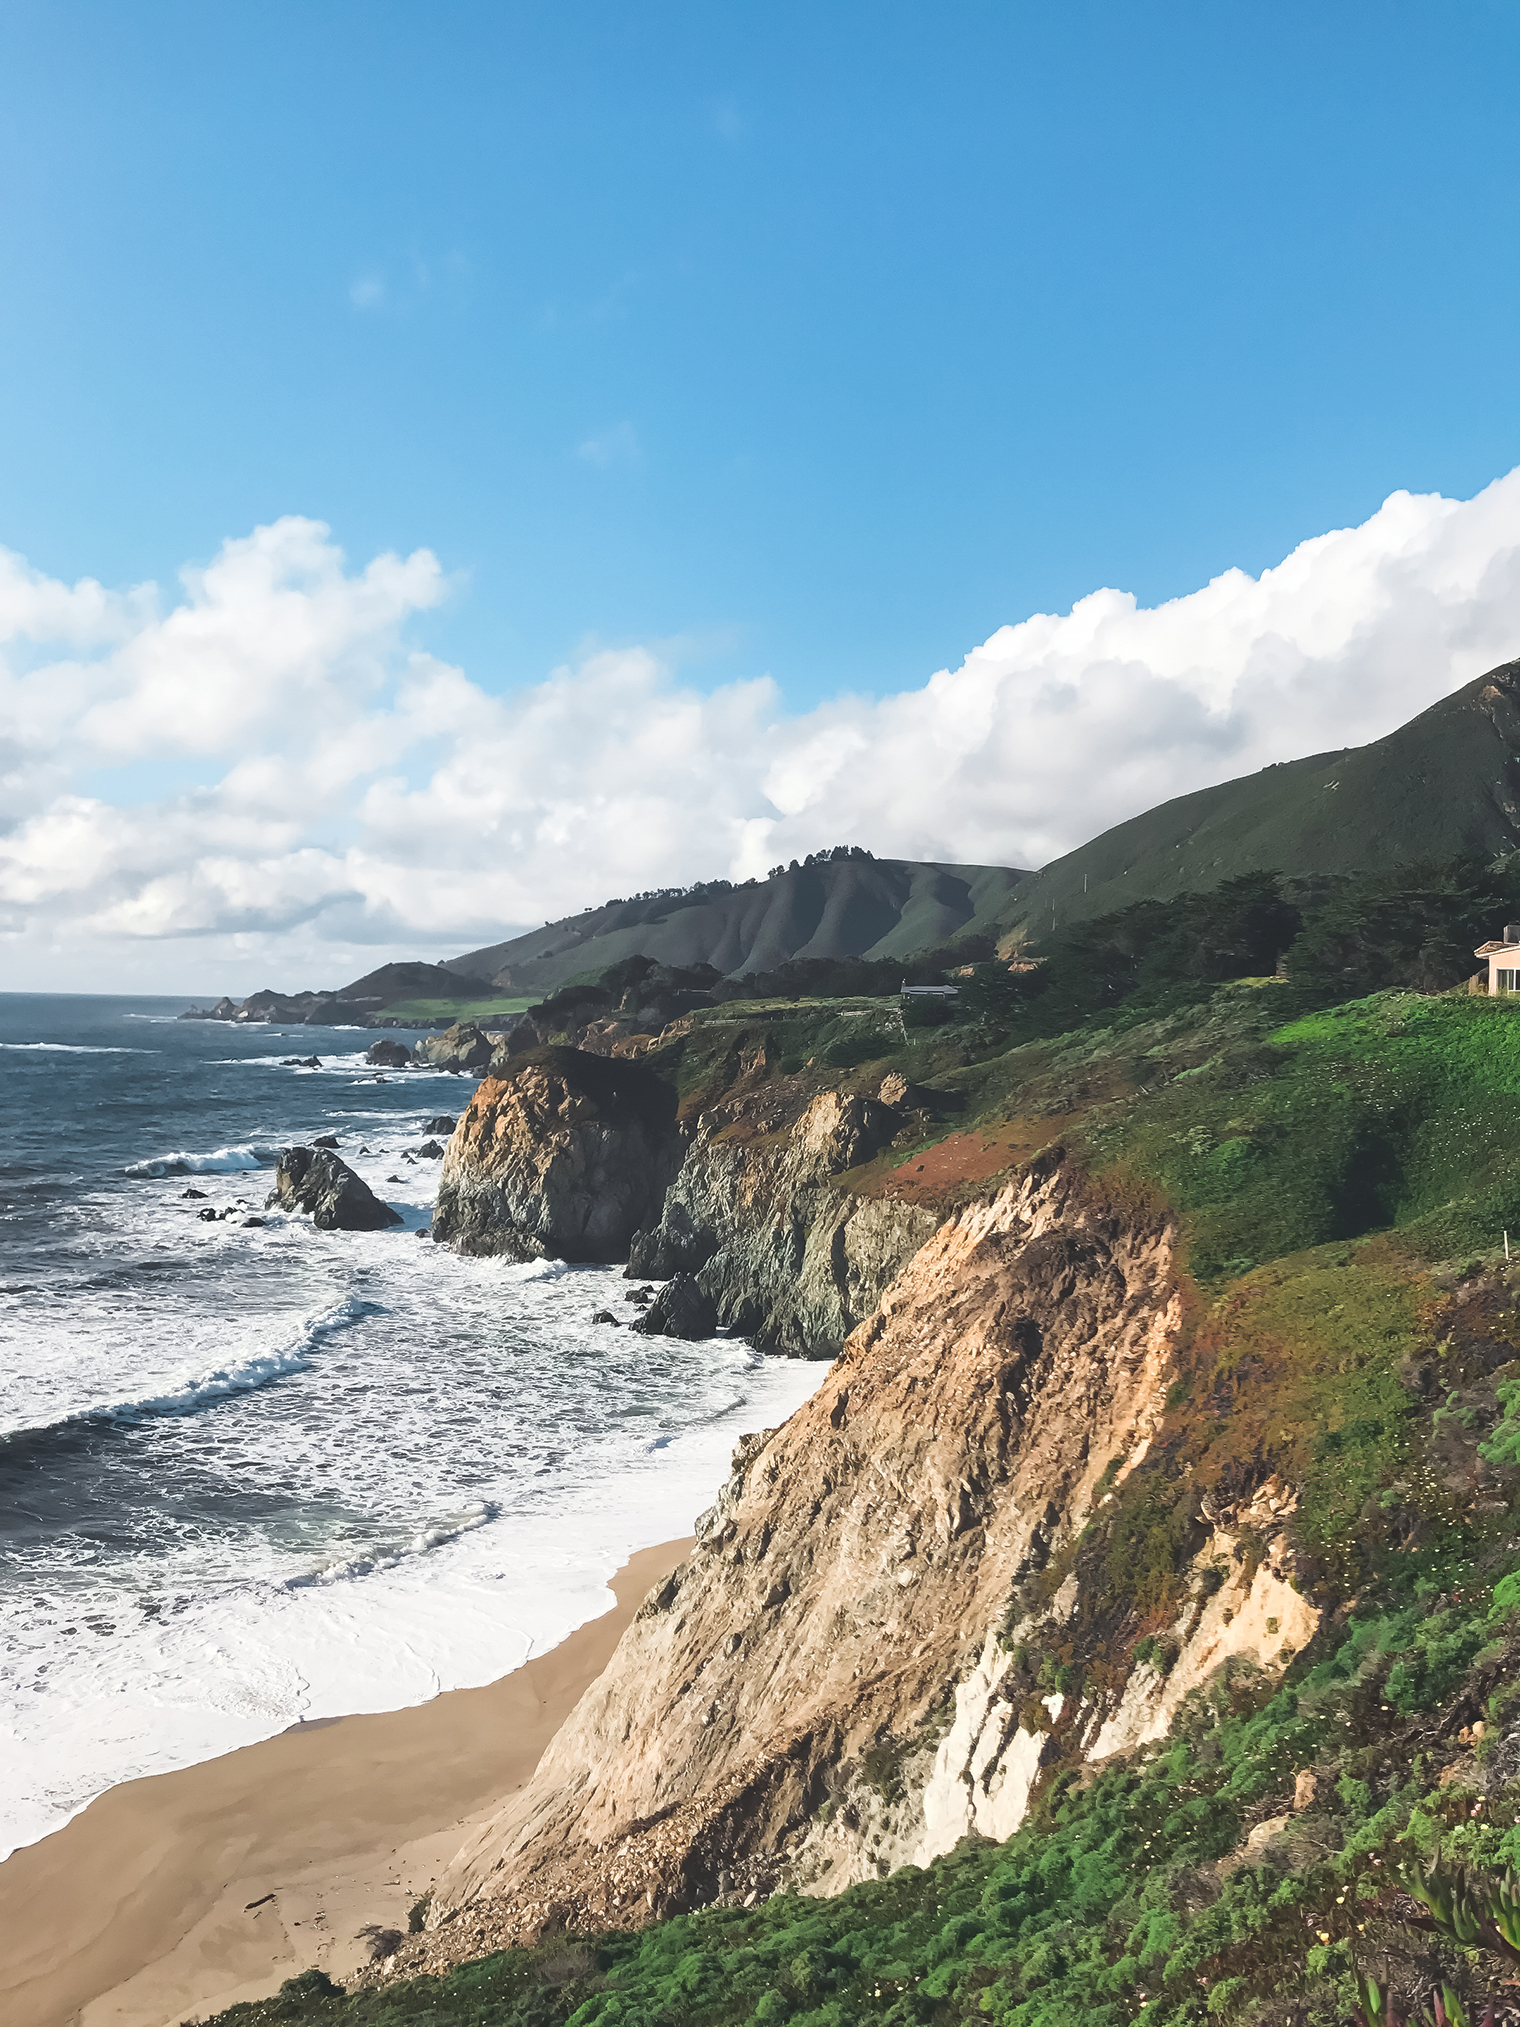 11 Iconic Can't Miss Stops Along the Pacific Coast Highway